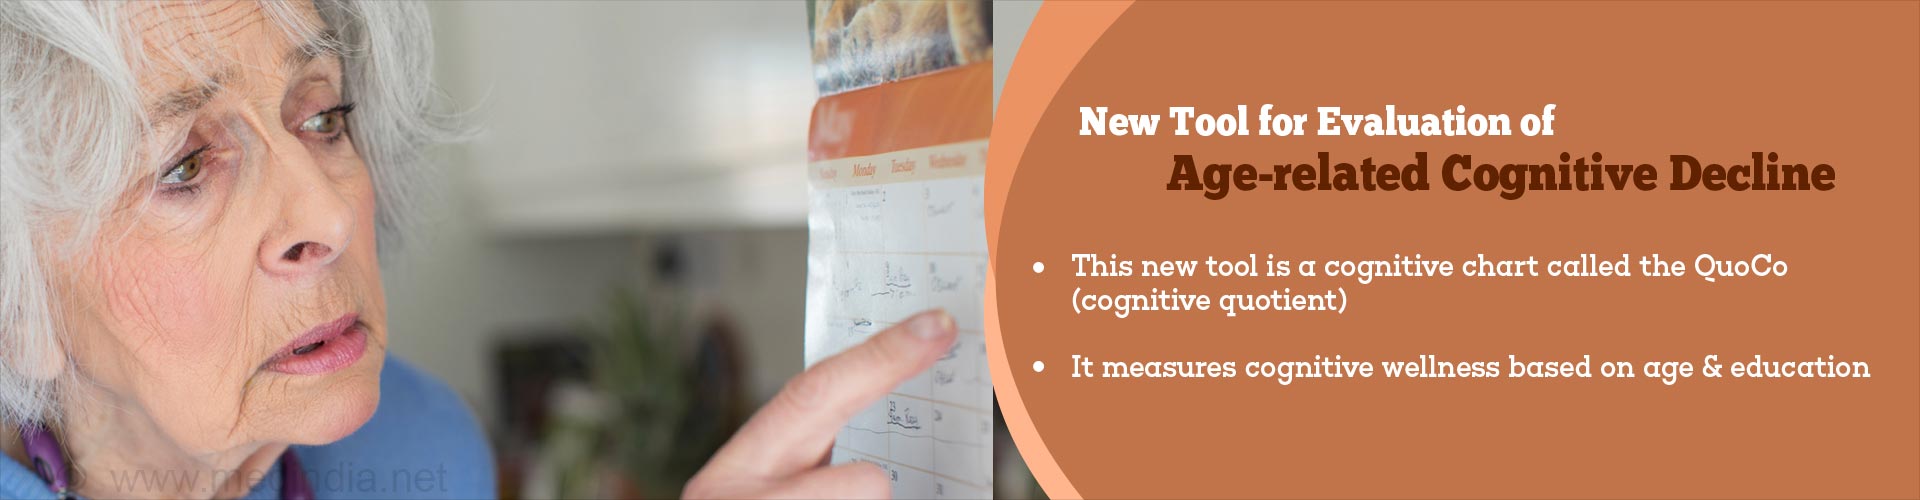 New tool for evaluation of age-related cognitive decline
- this new tool is a cognitive chart called the QuoCo (cognitive quotient)
- it measures cognitive wellness based on age & education